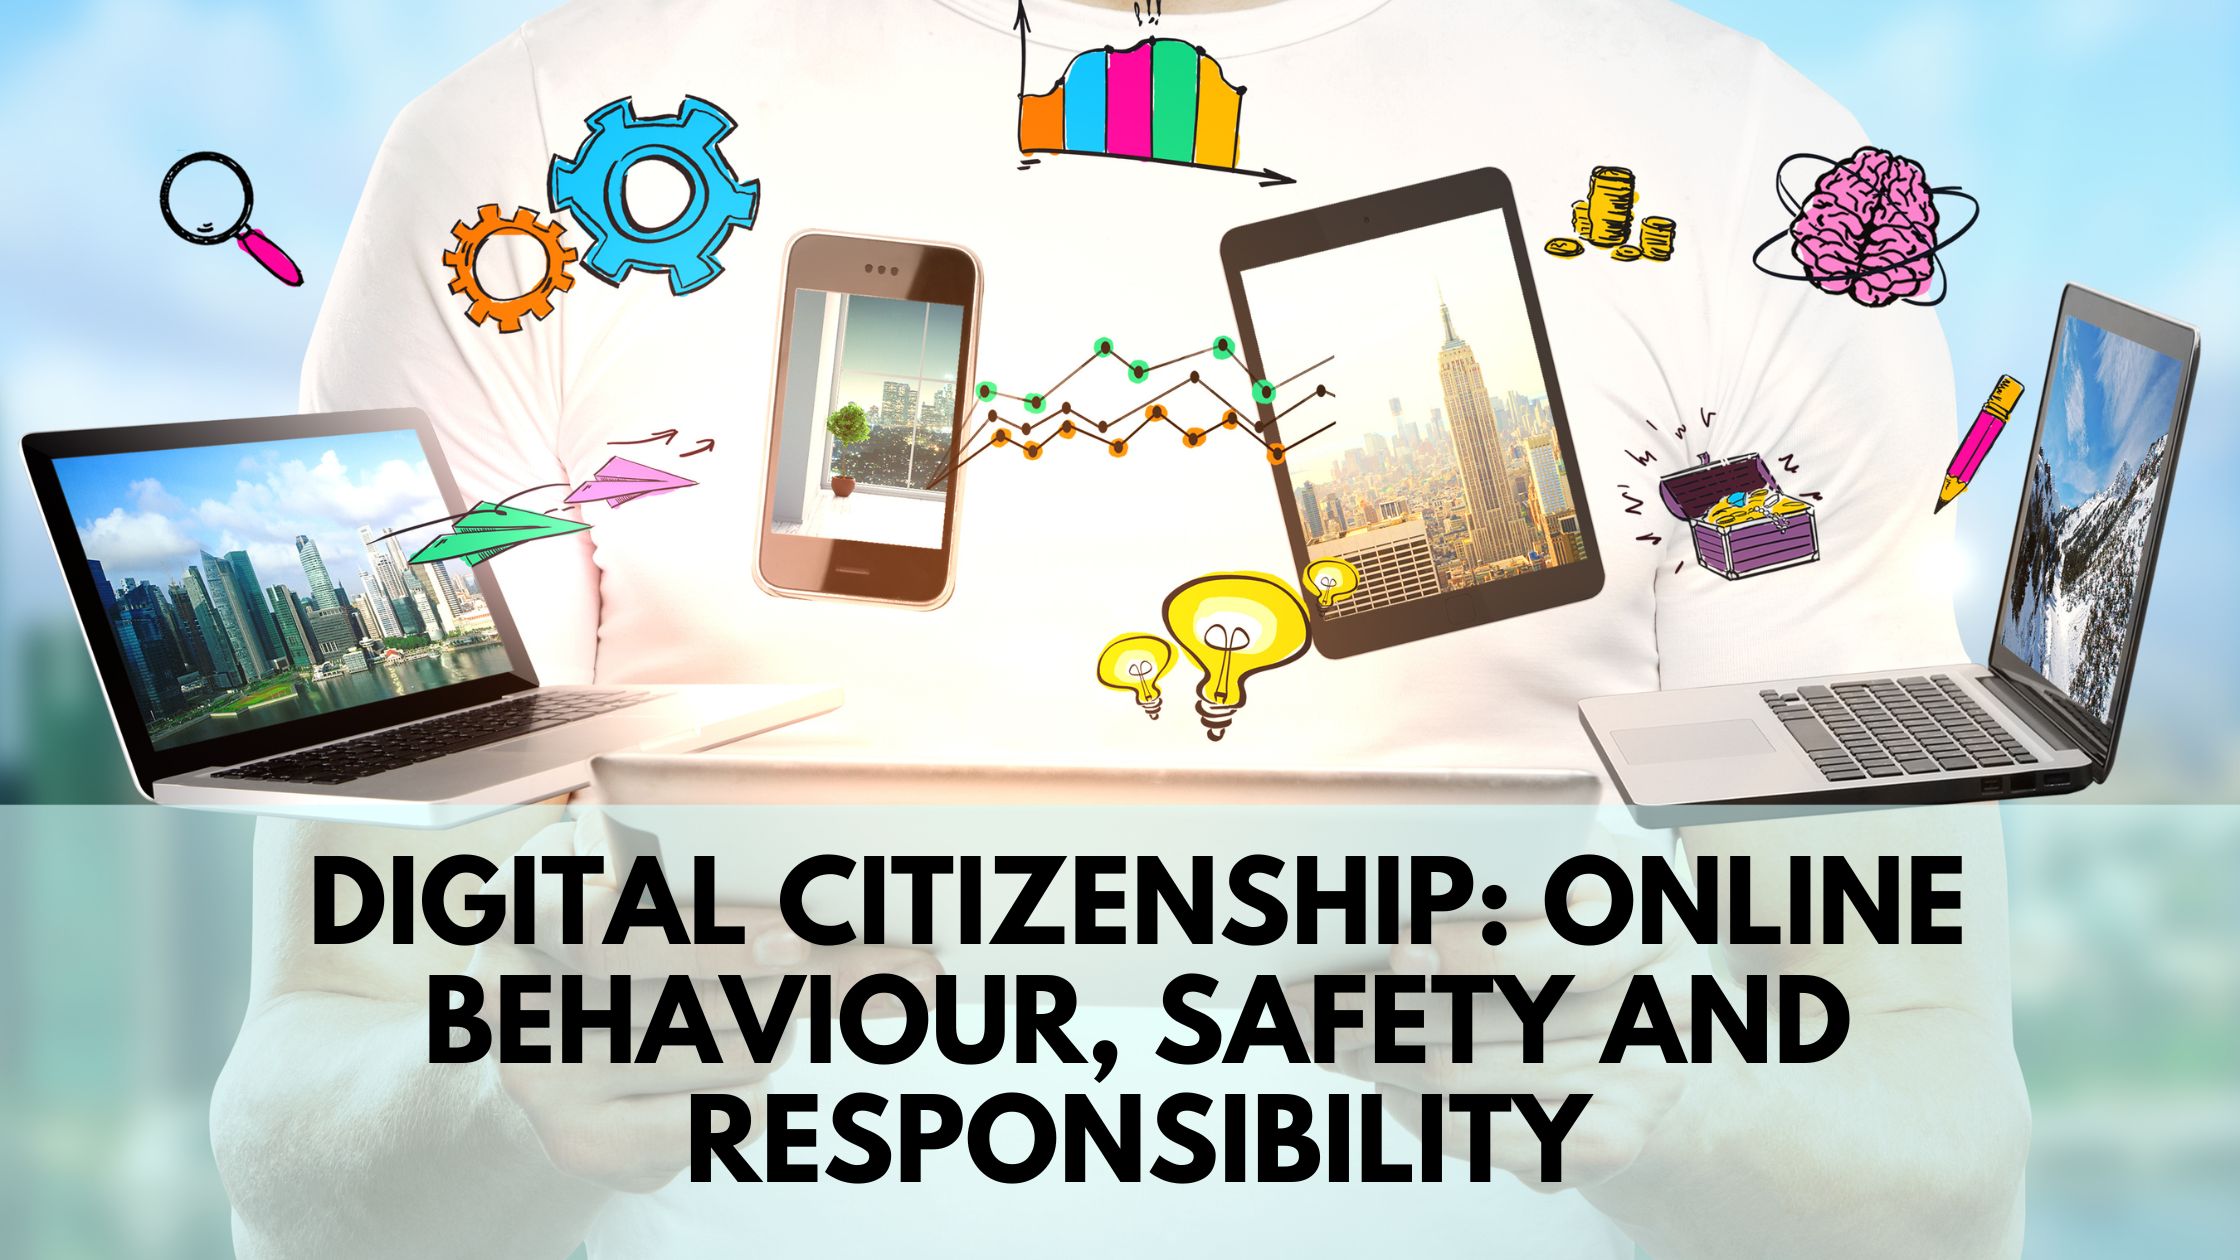 Digital citizenship: Online behaviour, safety and responsibility